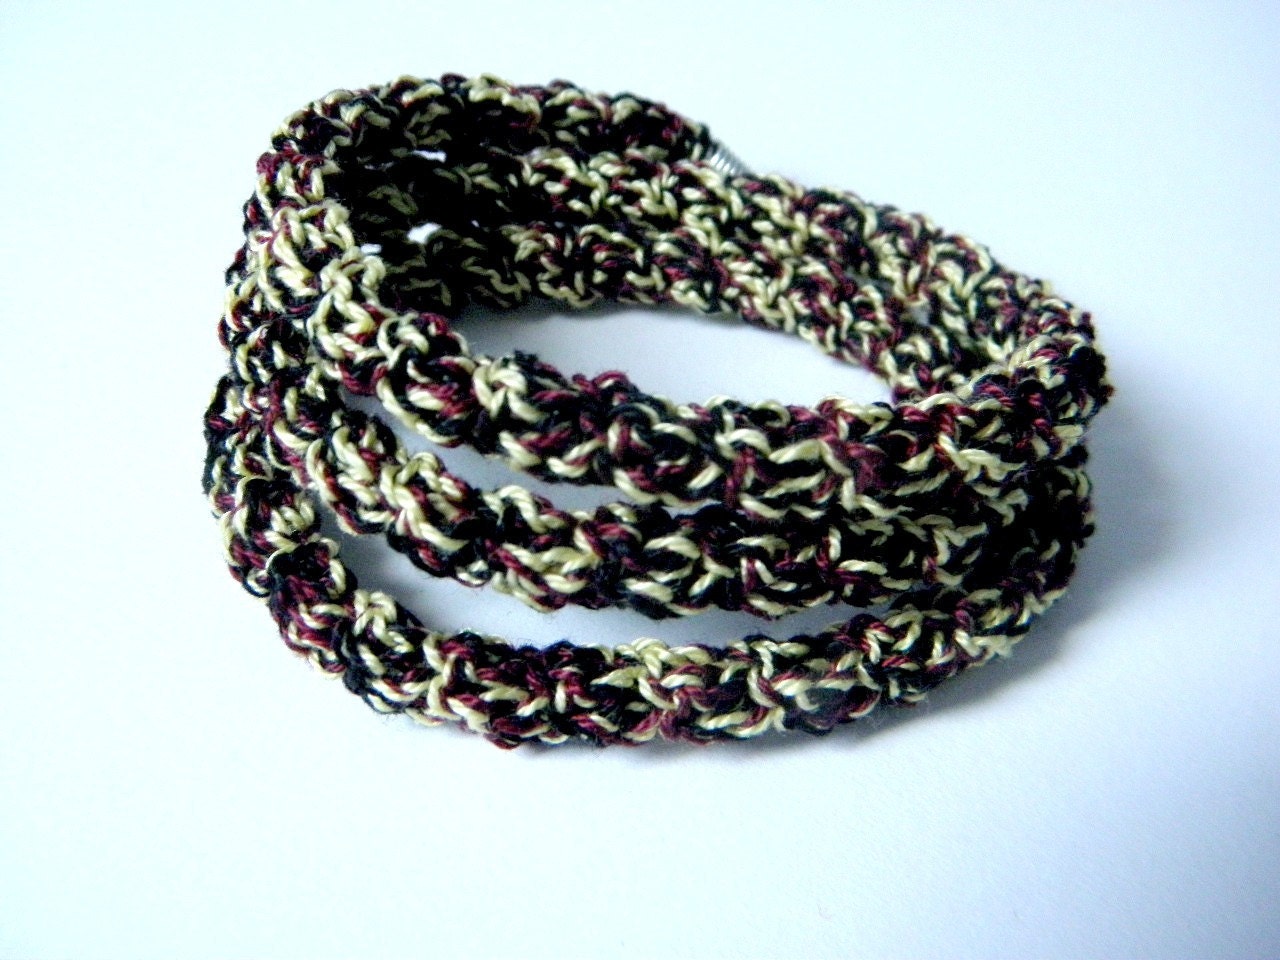 Crochet bracelet made of cotton yellow black and burgundy color